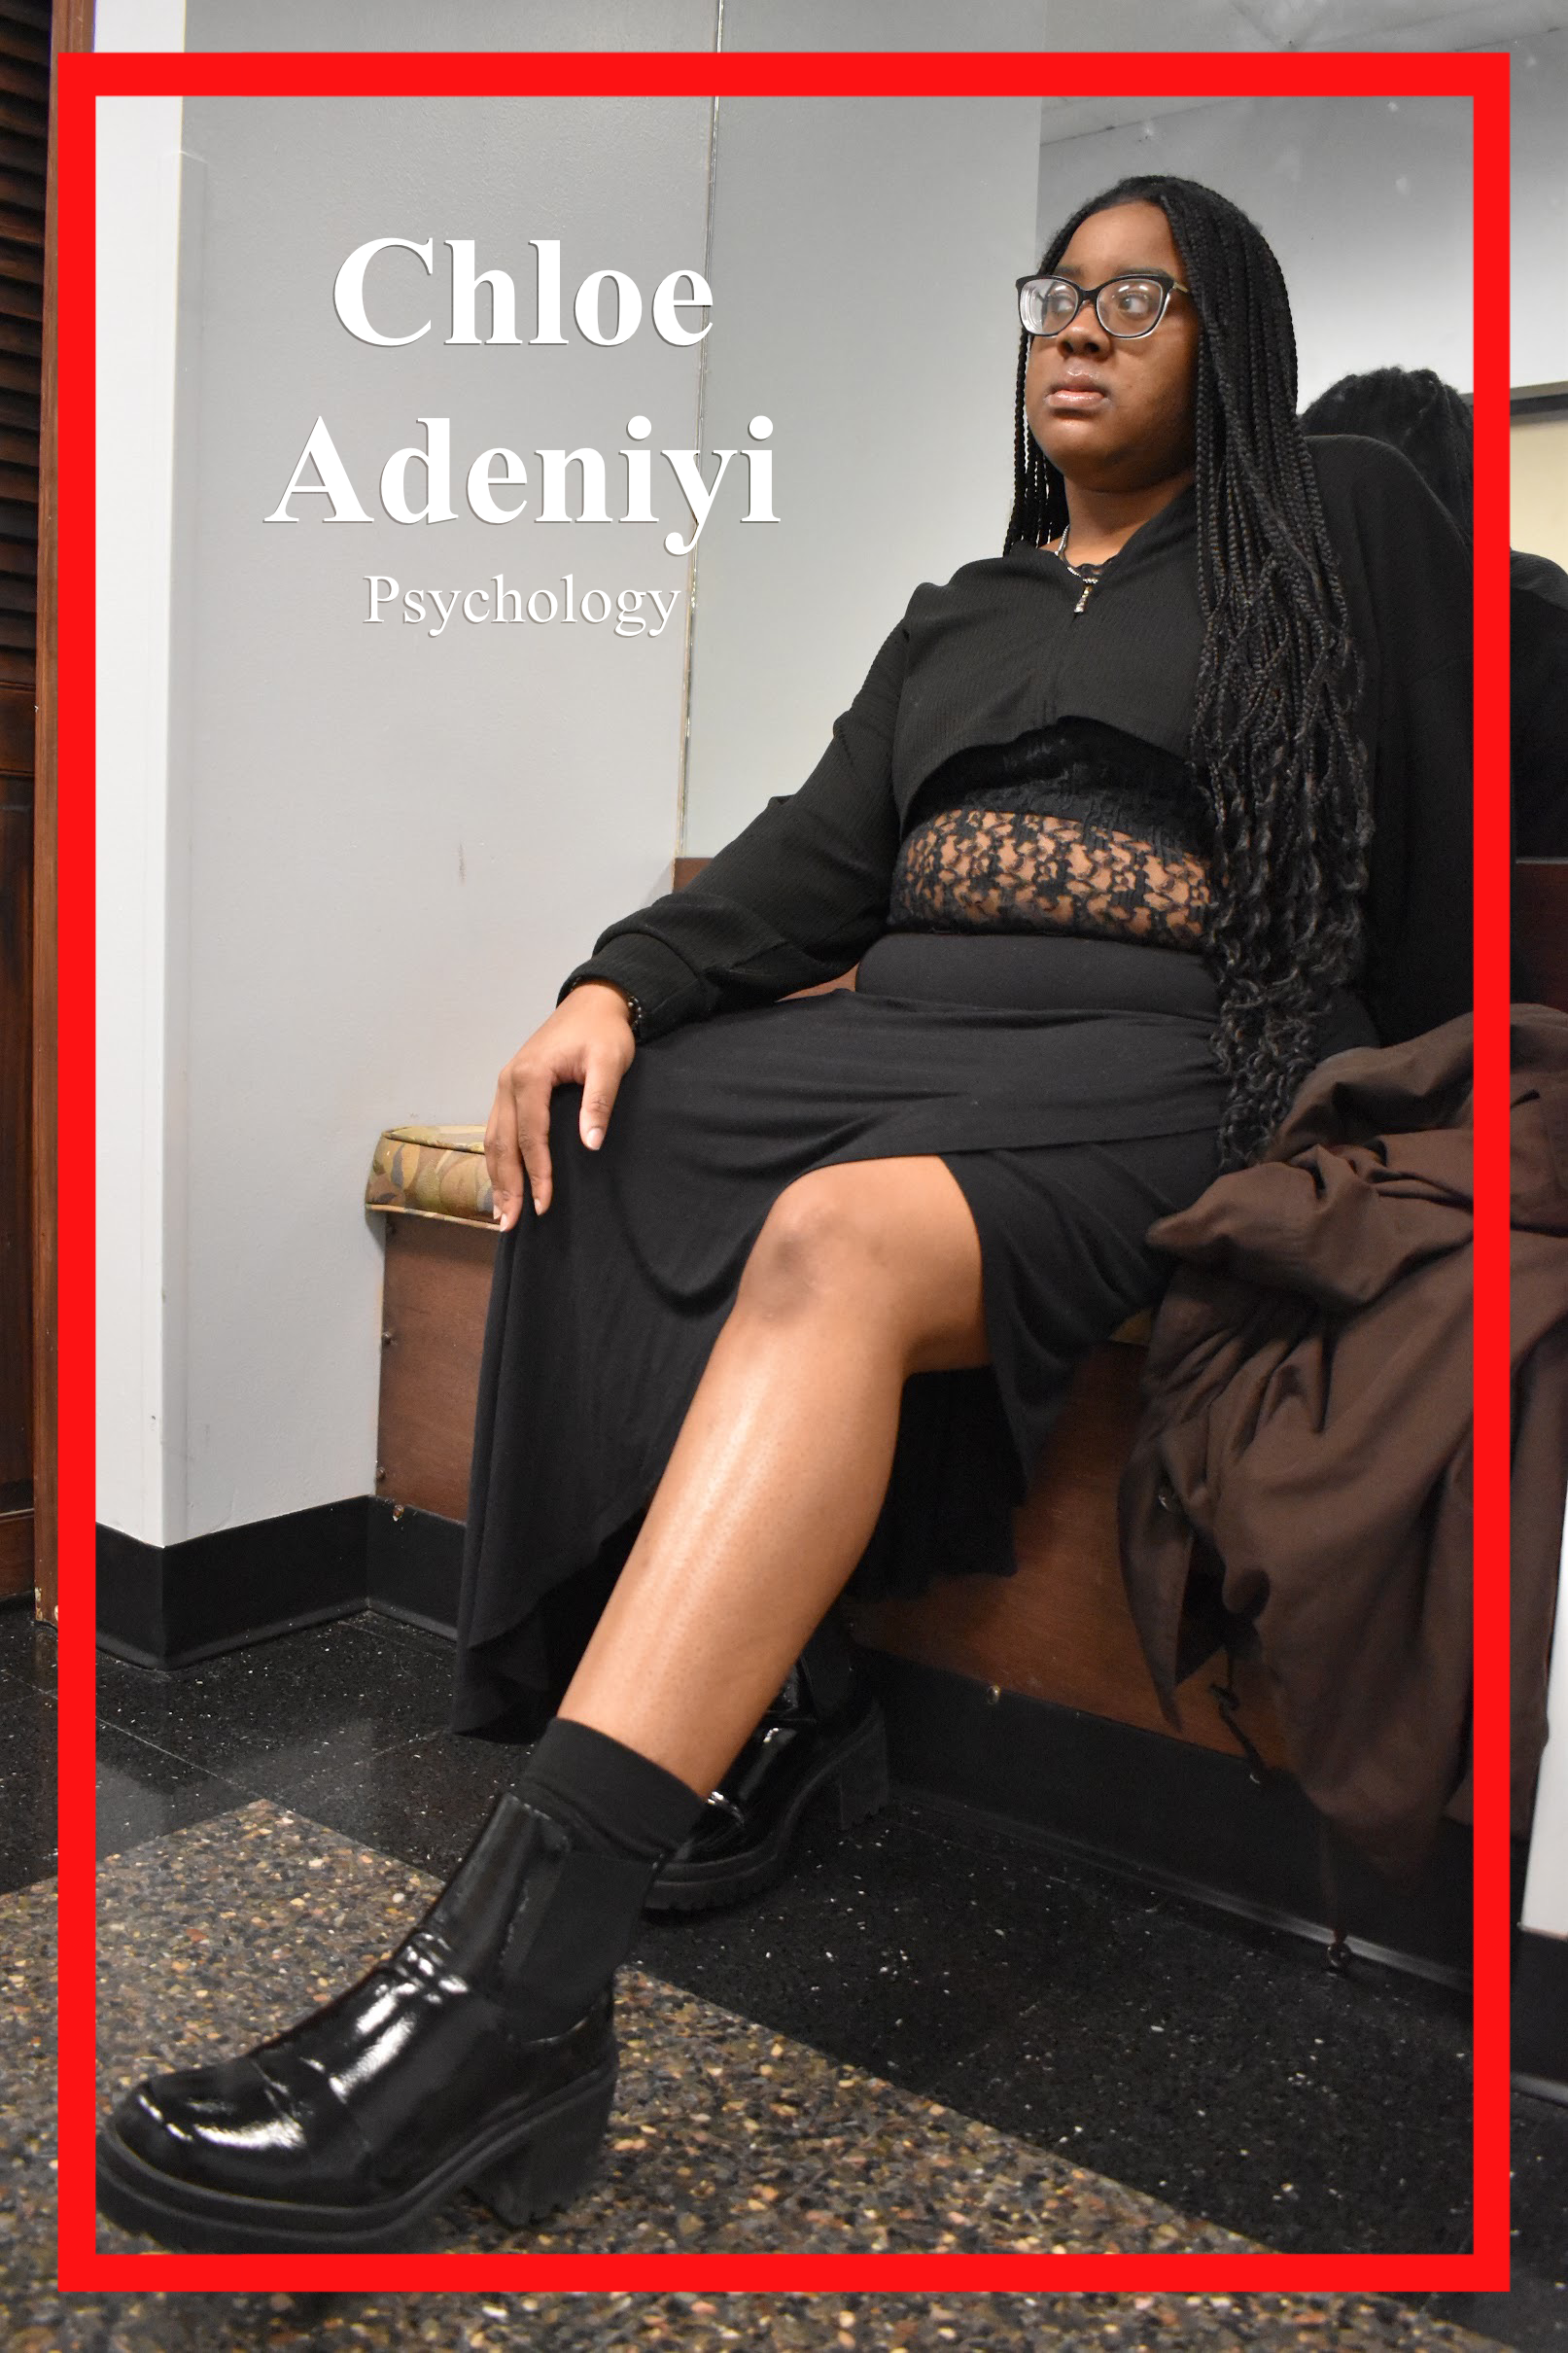 Chloe Adeniyi. Psychology Major, sitting on mirrored wall. Donned in all black from a cropped sweater, laced top, slit skirt and shiny black leather boots.